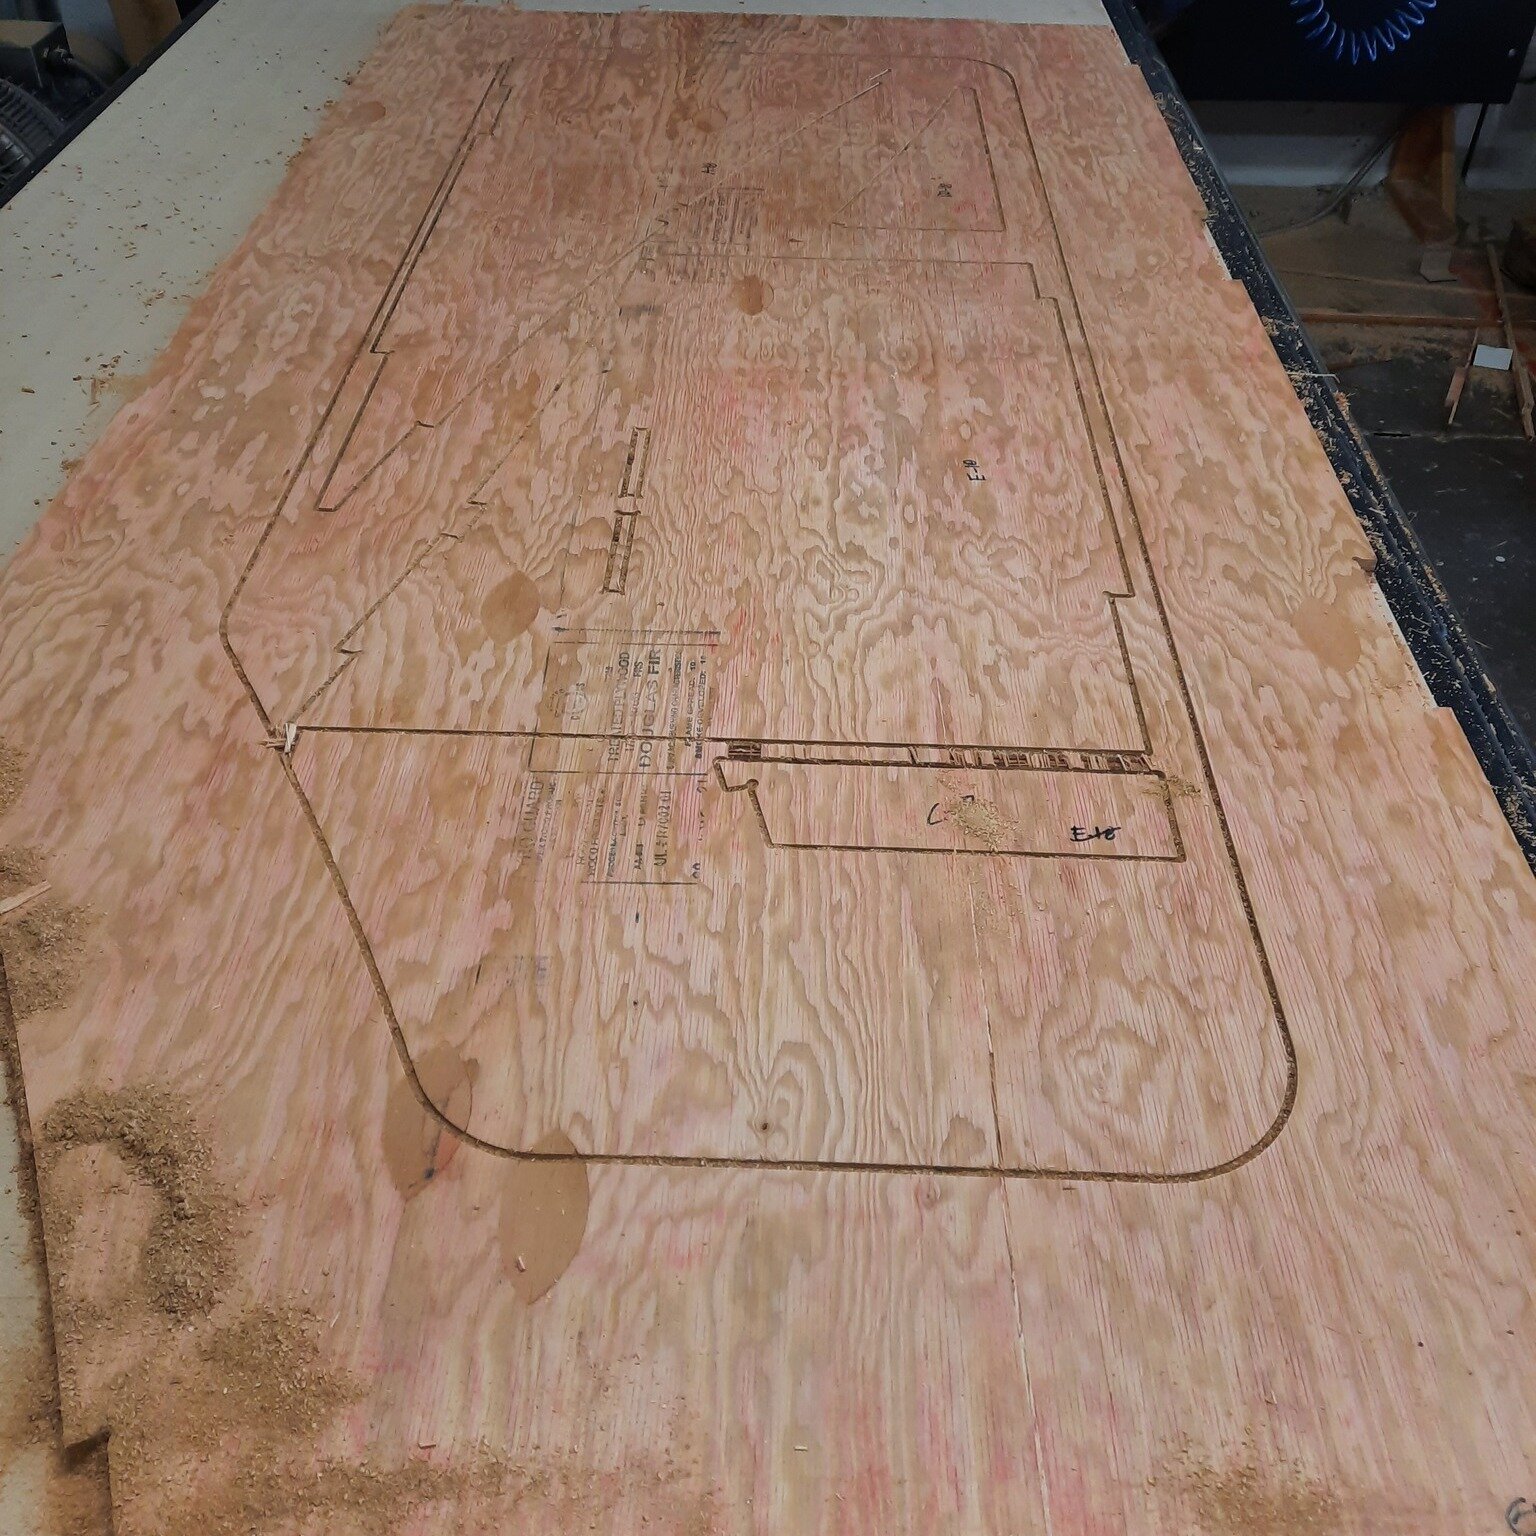 This plywood has a strange pinkish color because it is fire rated &frac34;&rdquo; ACX plywood. We are cutting it for @awscustomdesignsninja who is creating a warped wall for a ninja gym. Safety first! 😁

#faq #firerated #plywood #cnc #cncrouter #cnc